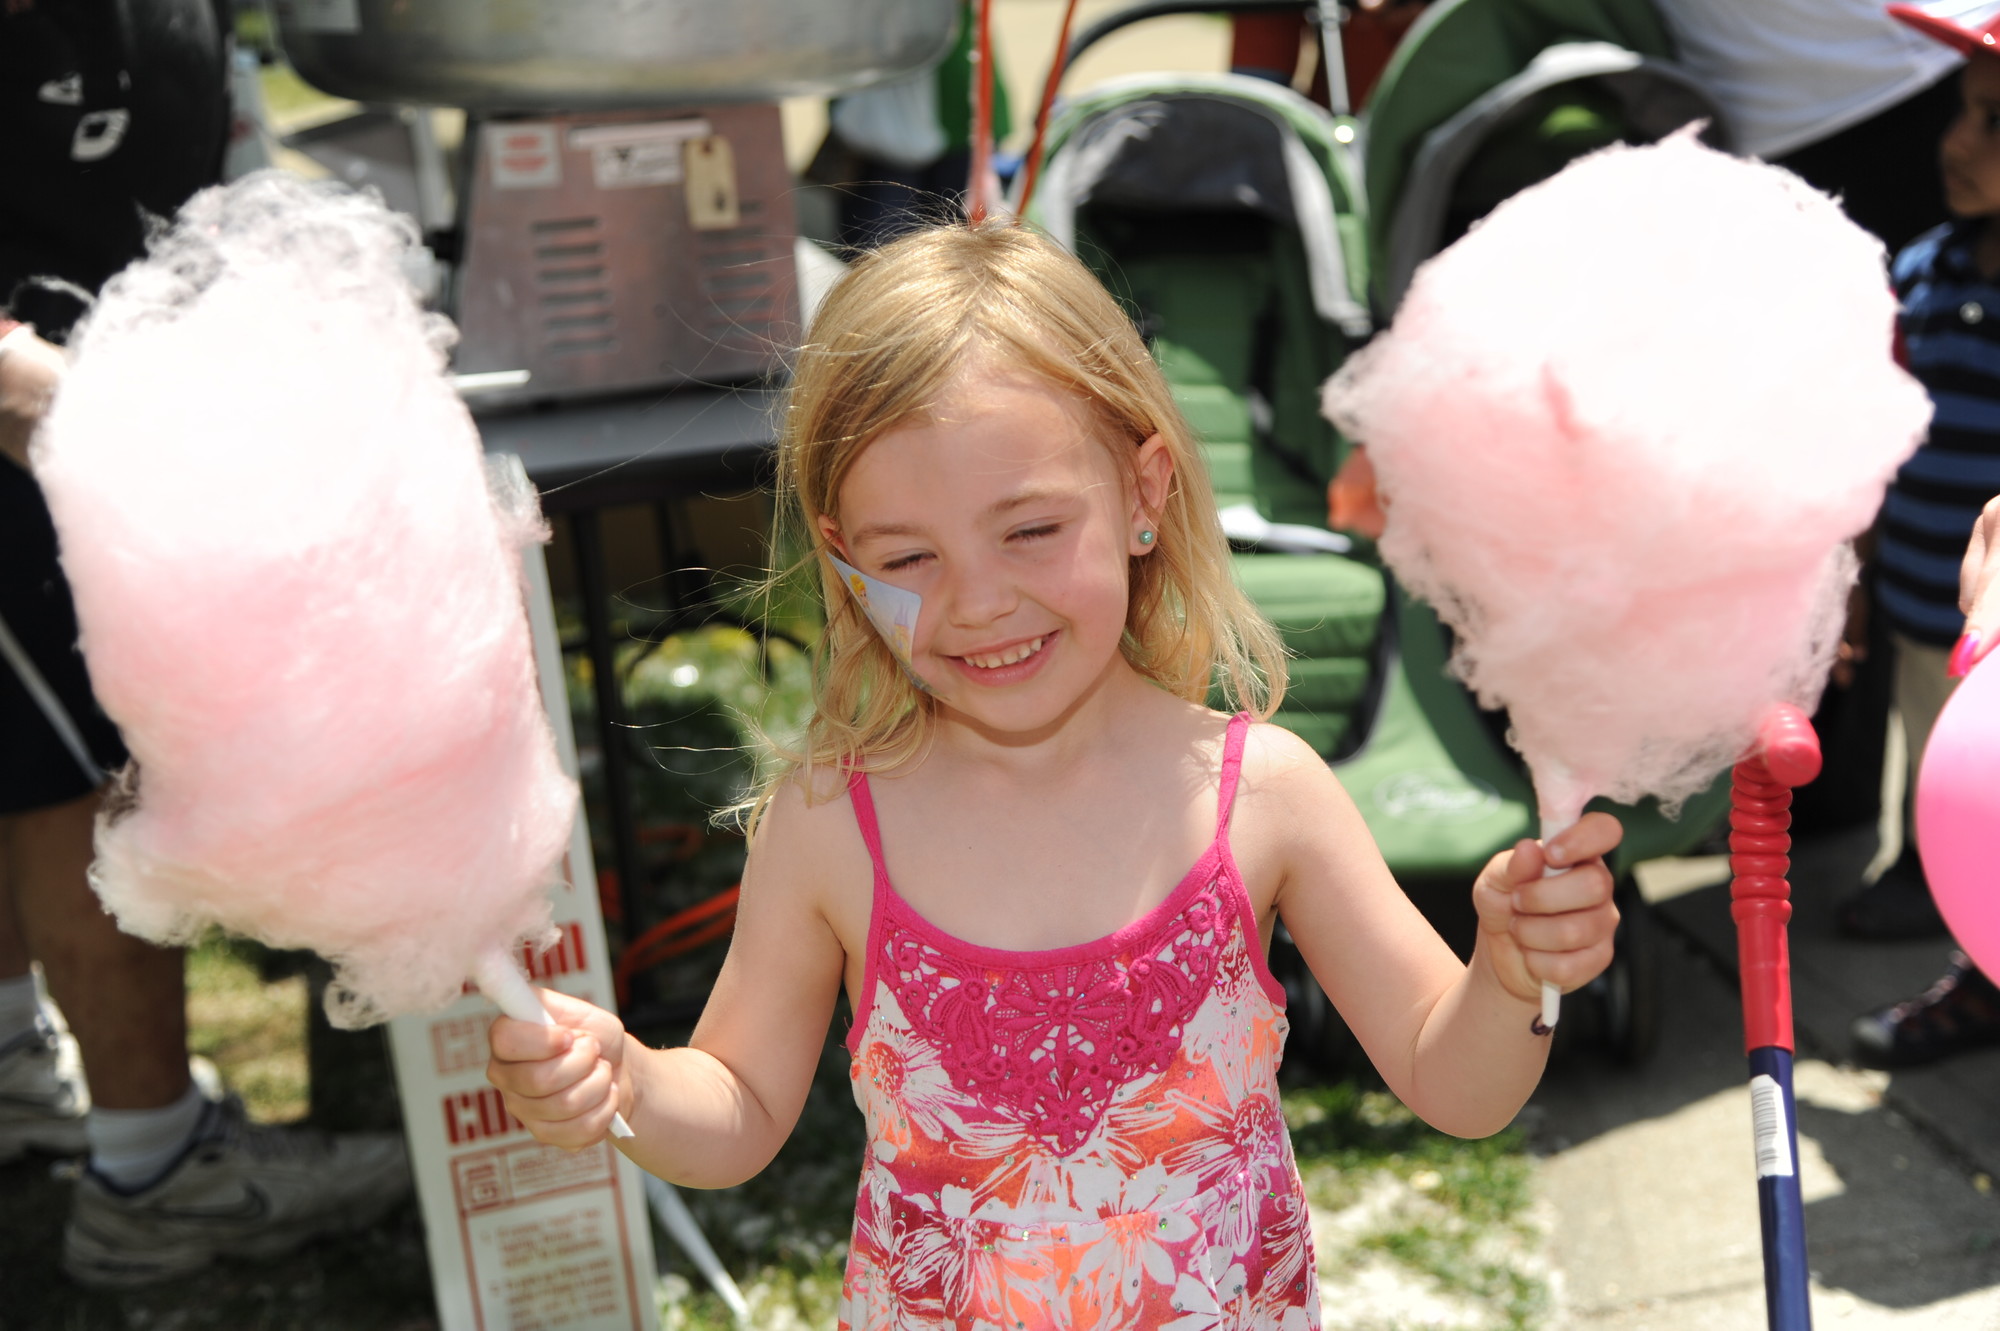 At Pride Day, residents enjoy fun activities with their neighbors. Above, 4-year-old Peyton Chester enjoyed one of the sweeter items offered at last year’s event.